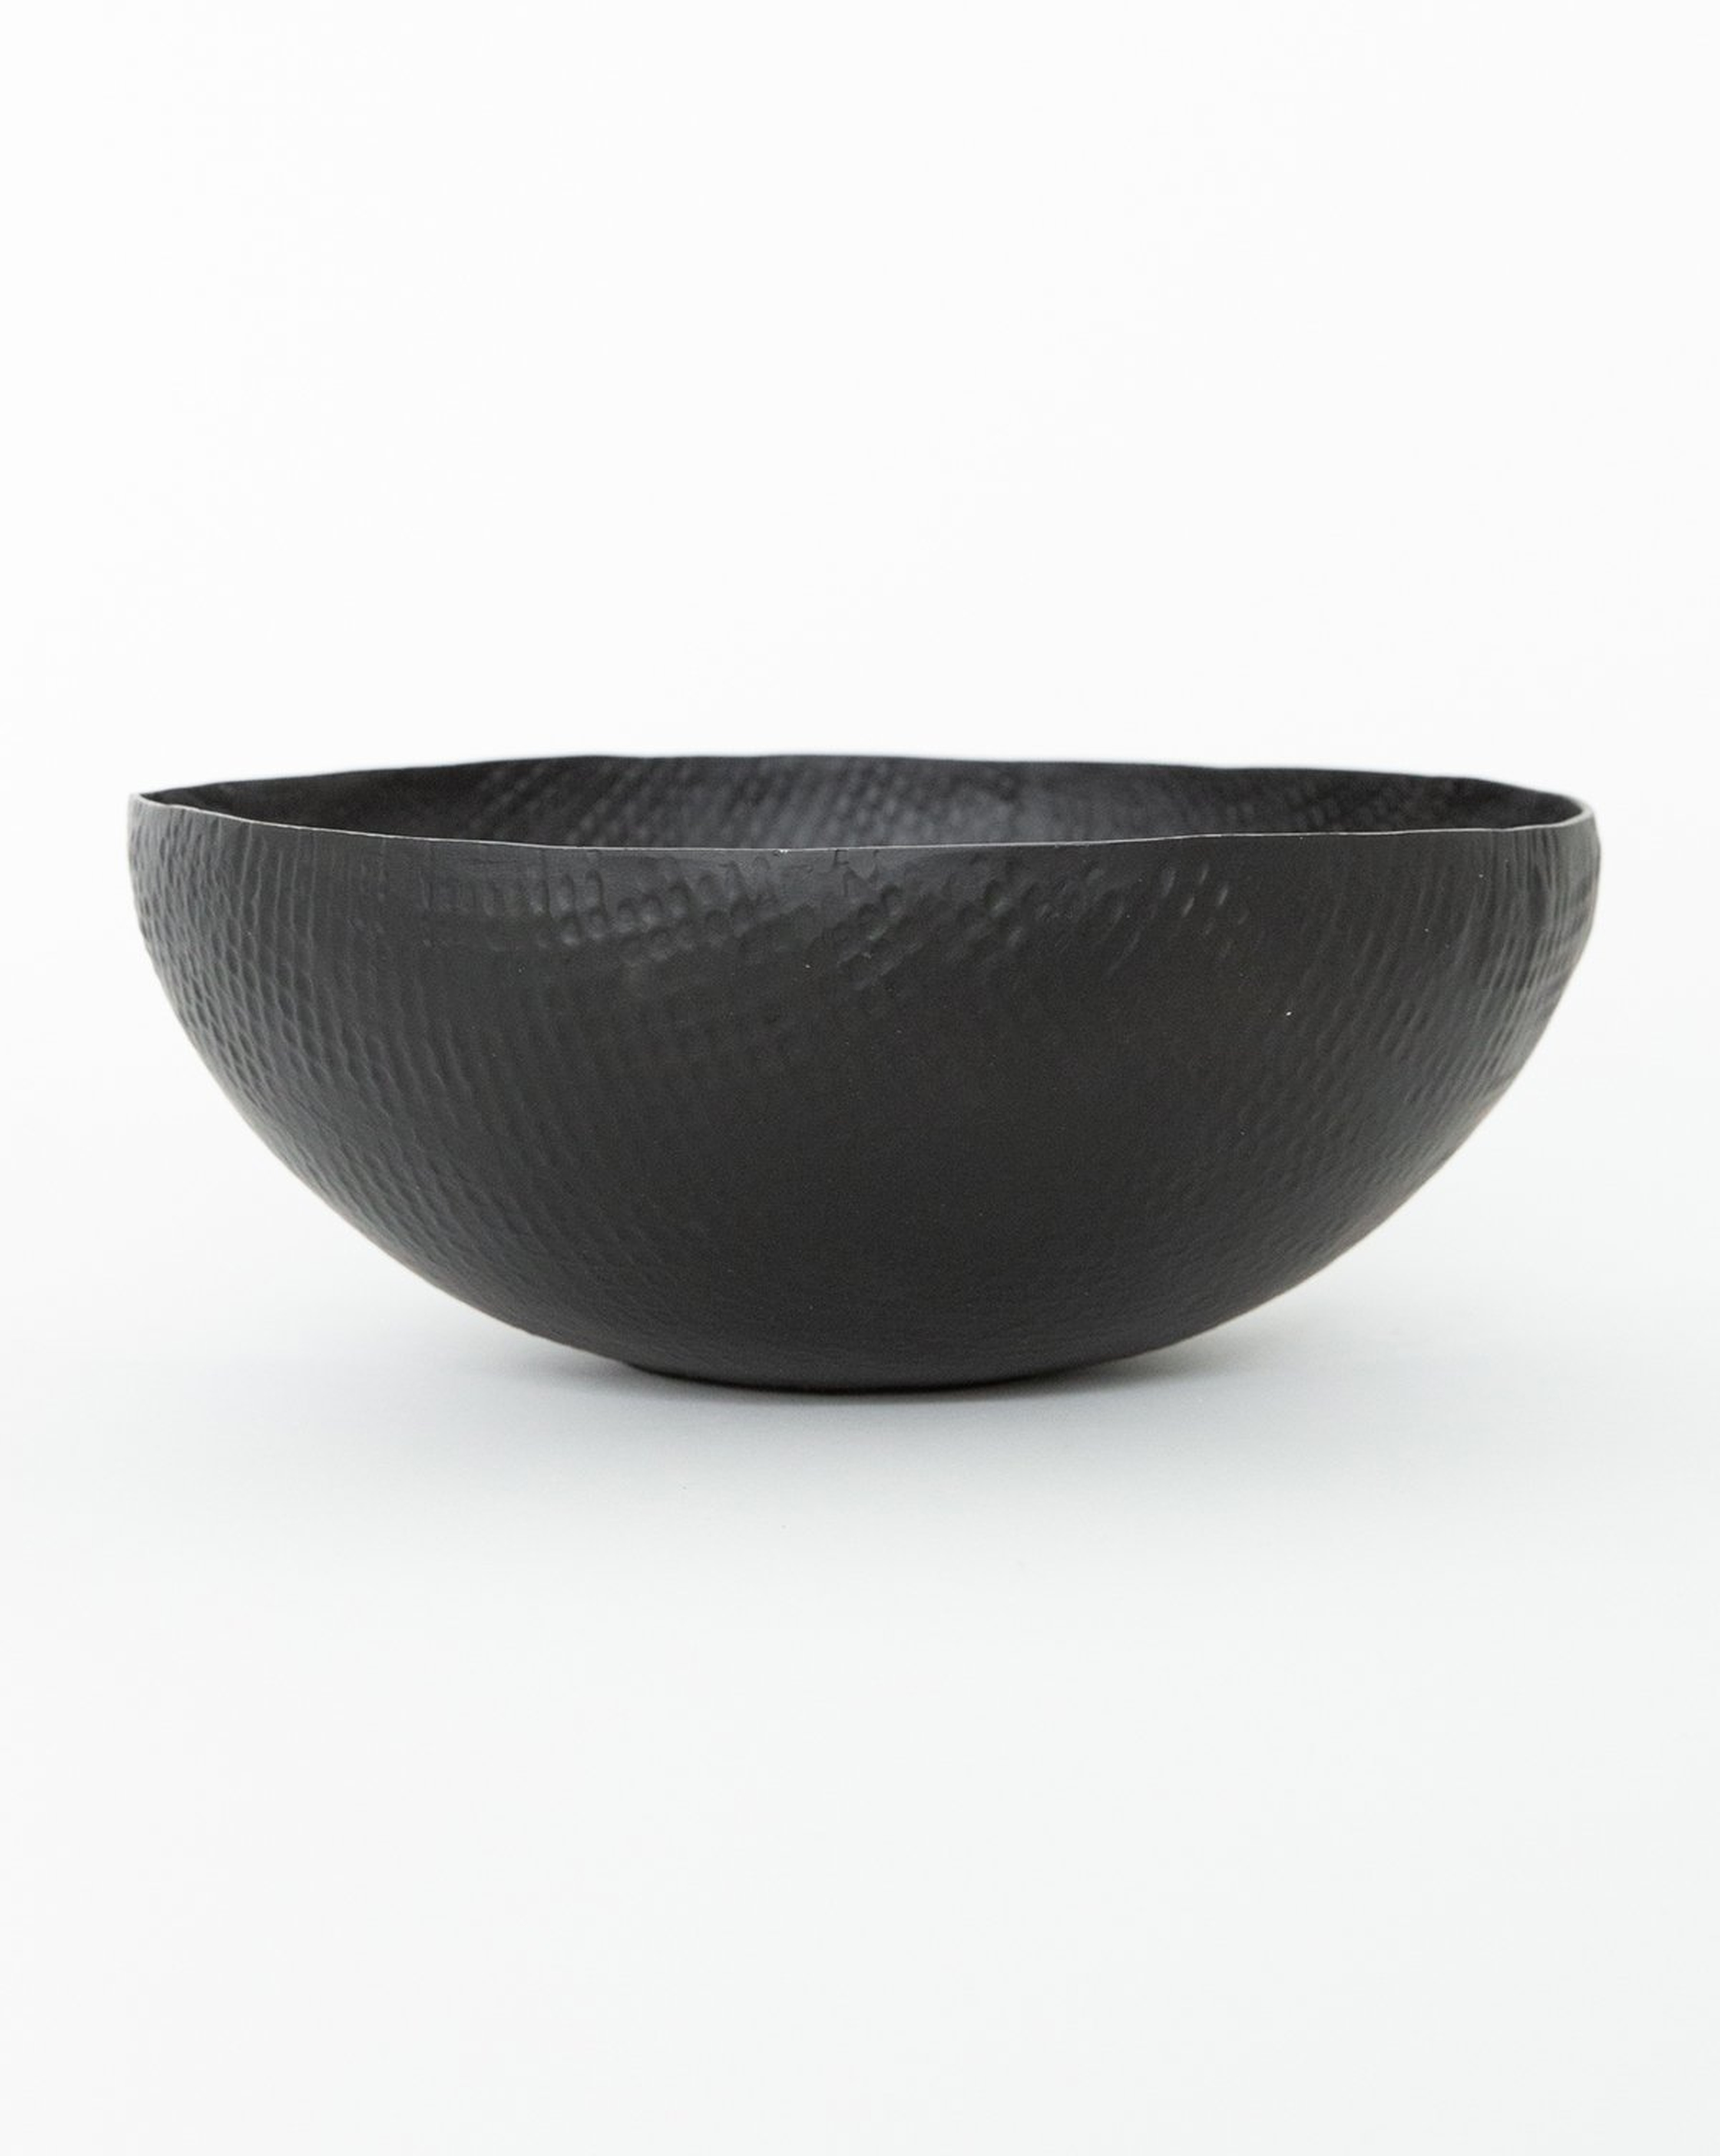 EMBOSSED BLACK BOWL - LARGE - McGee & Co.